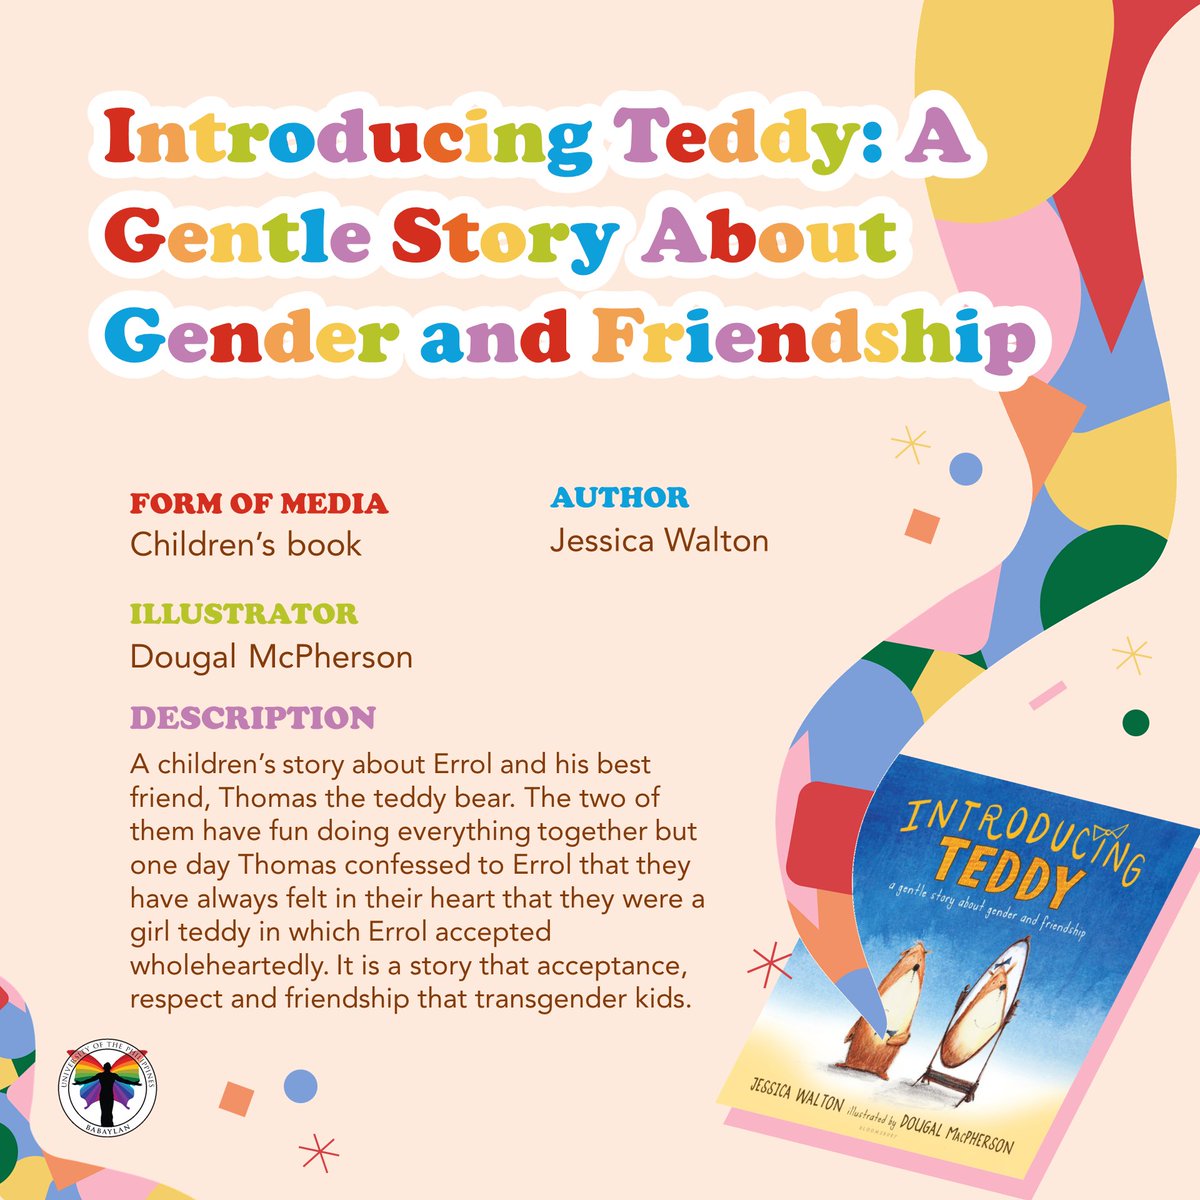 21. Introducing Teddy: A Gentle Story about Gender and Friendship